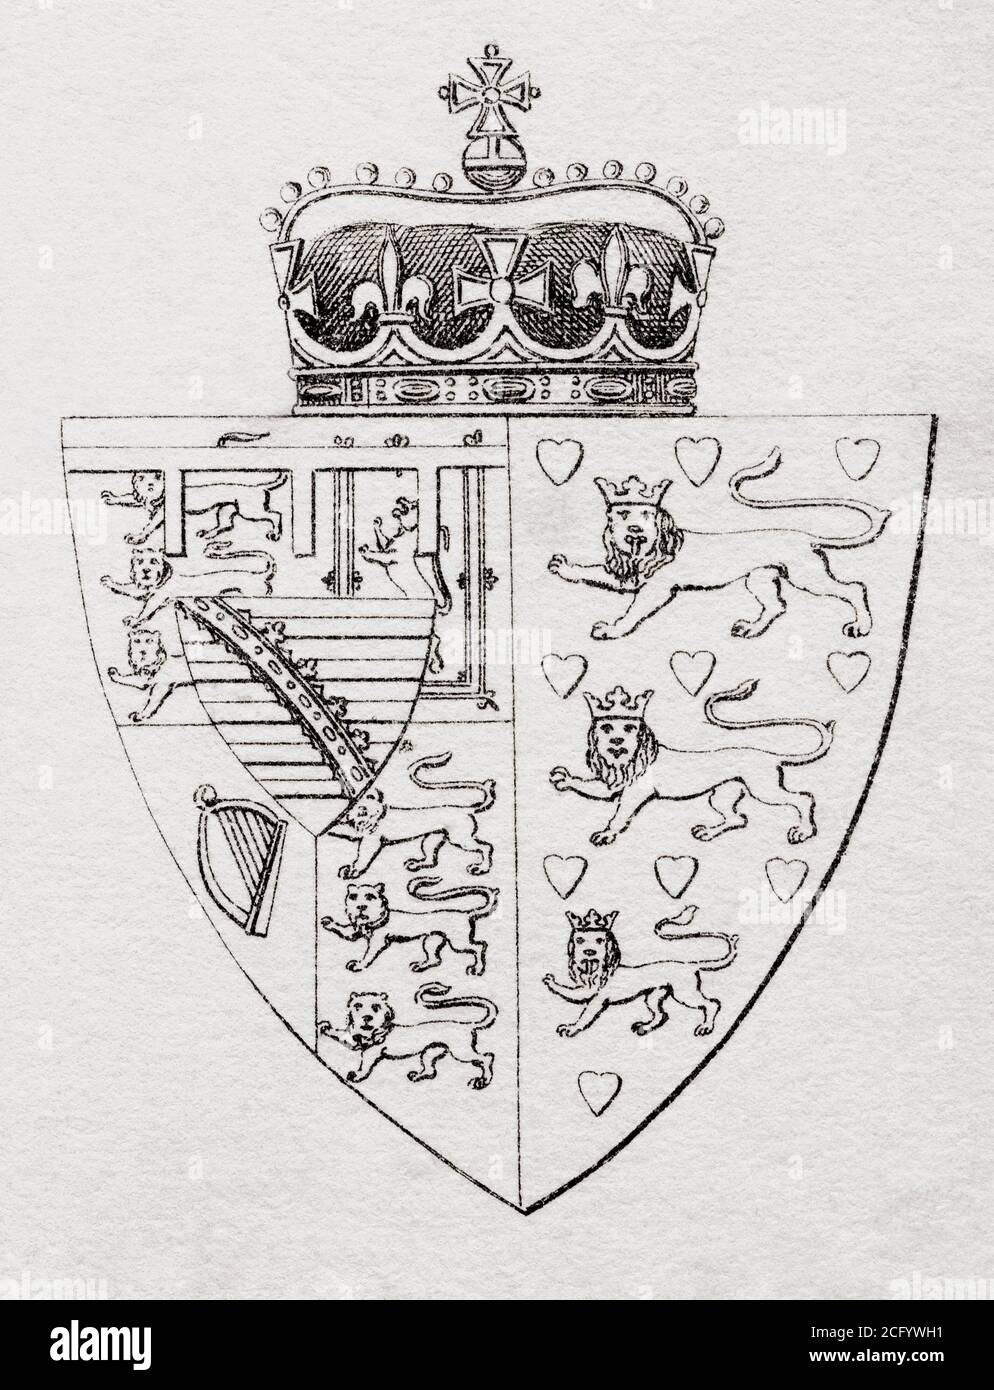 Arms of the Princess of Wales, Impaled by the Prince of Wales.  Impalement or marshalling is a combination of two coats of arms side by side in one divided heraldic shield to denote a union, most often that of a husband and wife, in this case the Prince and Princess of Wales.  From The National Encyclopaedia: A Dictionary of Universal Knowledge, published c.1890 Stock Photo